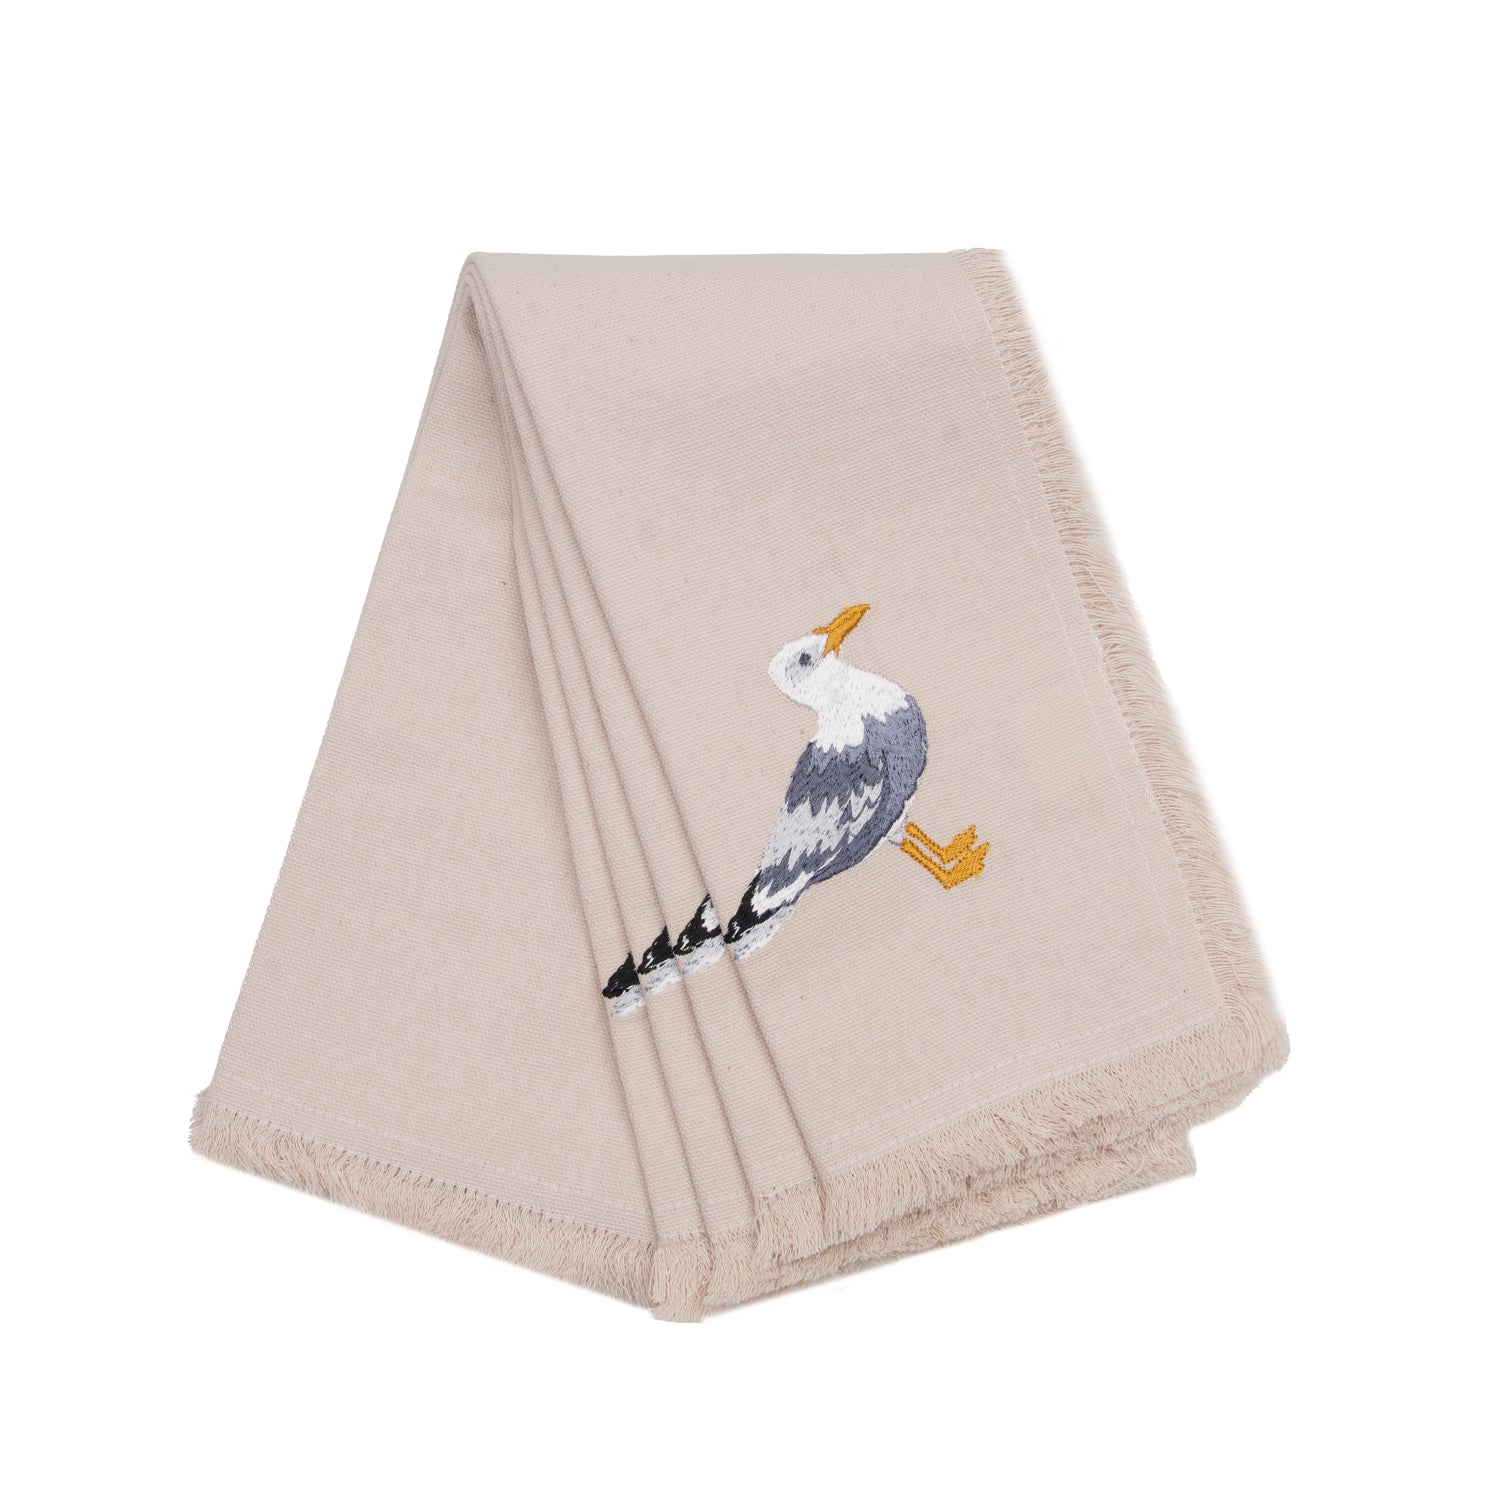 Sea gull embroidered on natural cotton fringed napkins.